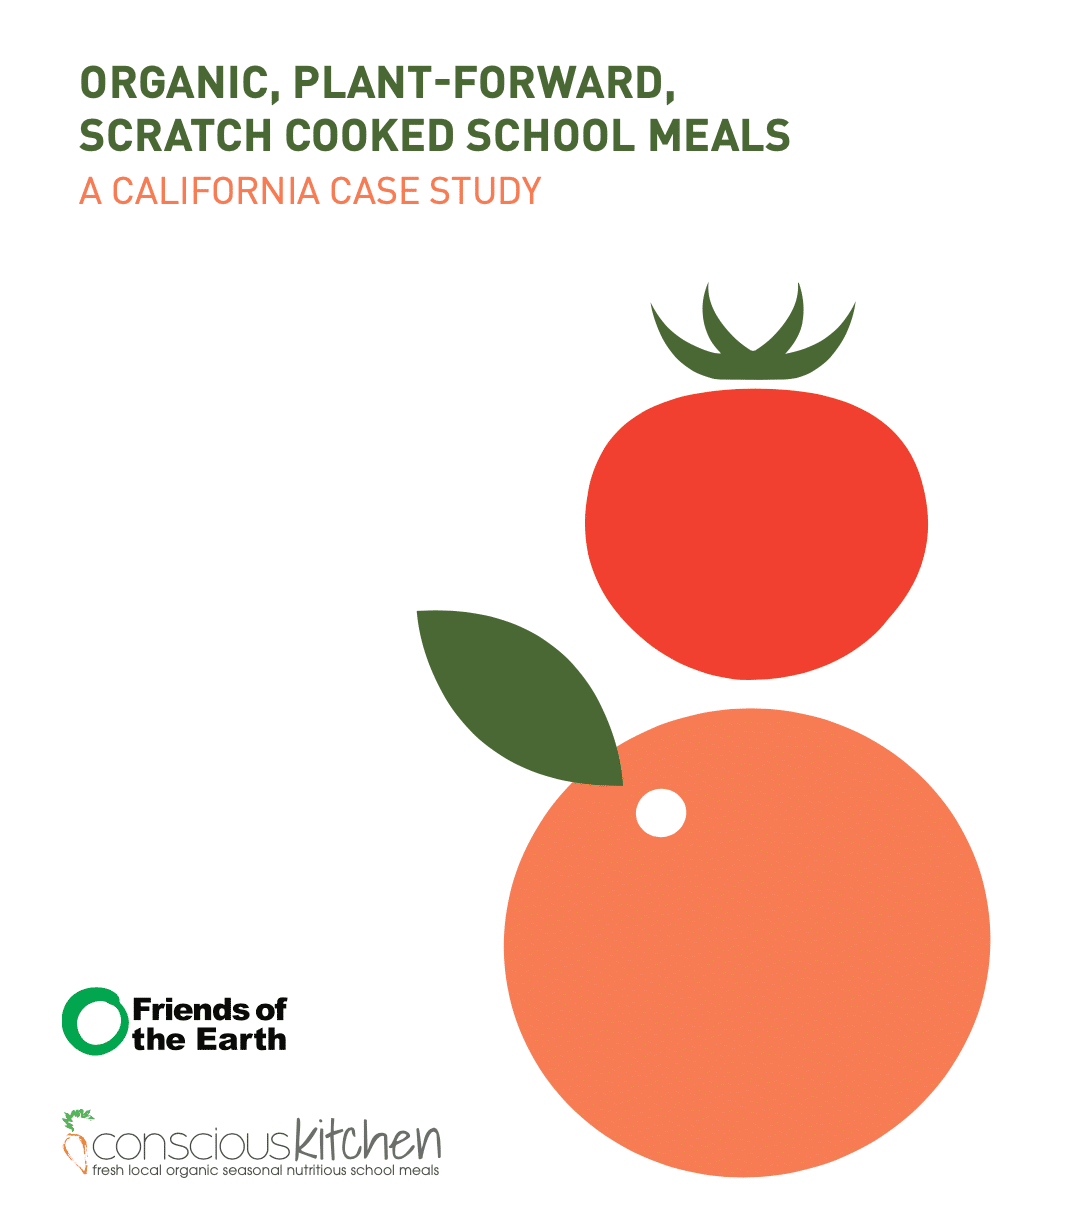 Organic, Plant-Forward, Scratch Cooked School Meals: A California Case Study